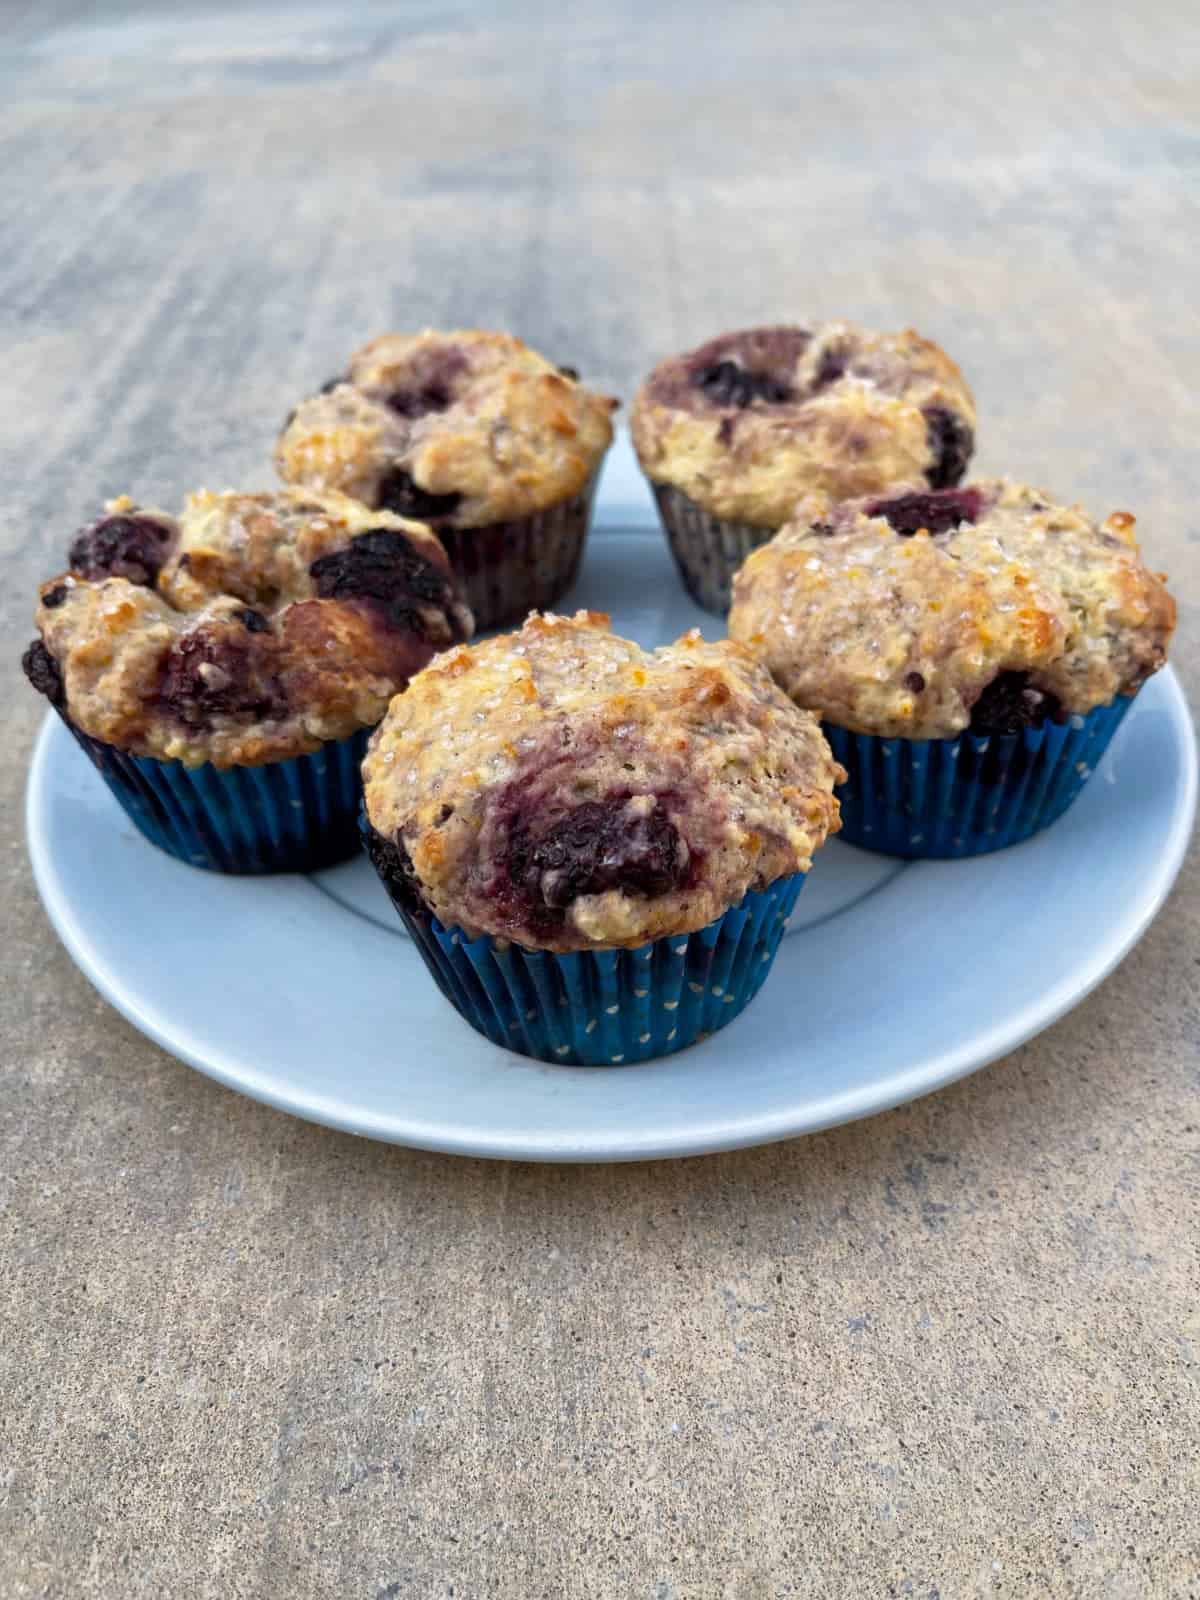 Blackberry muffins on small blue plate.